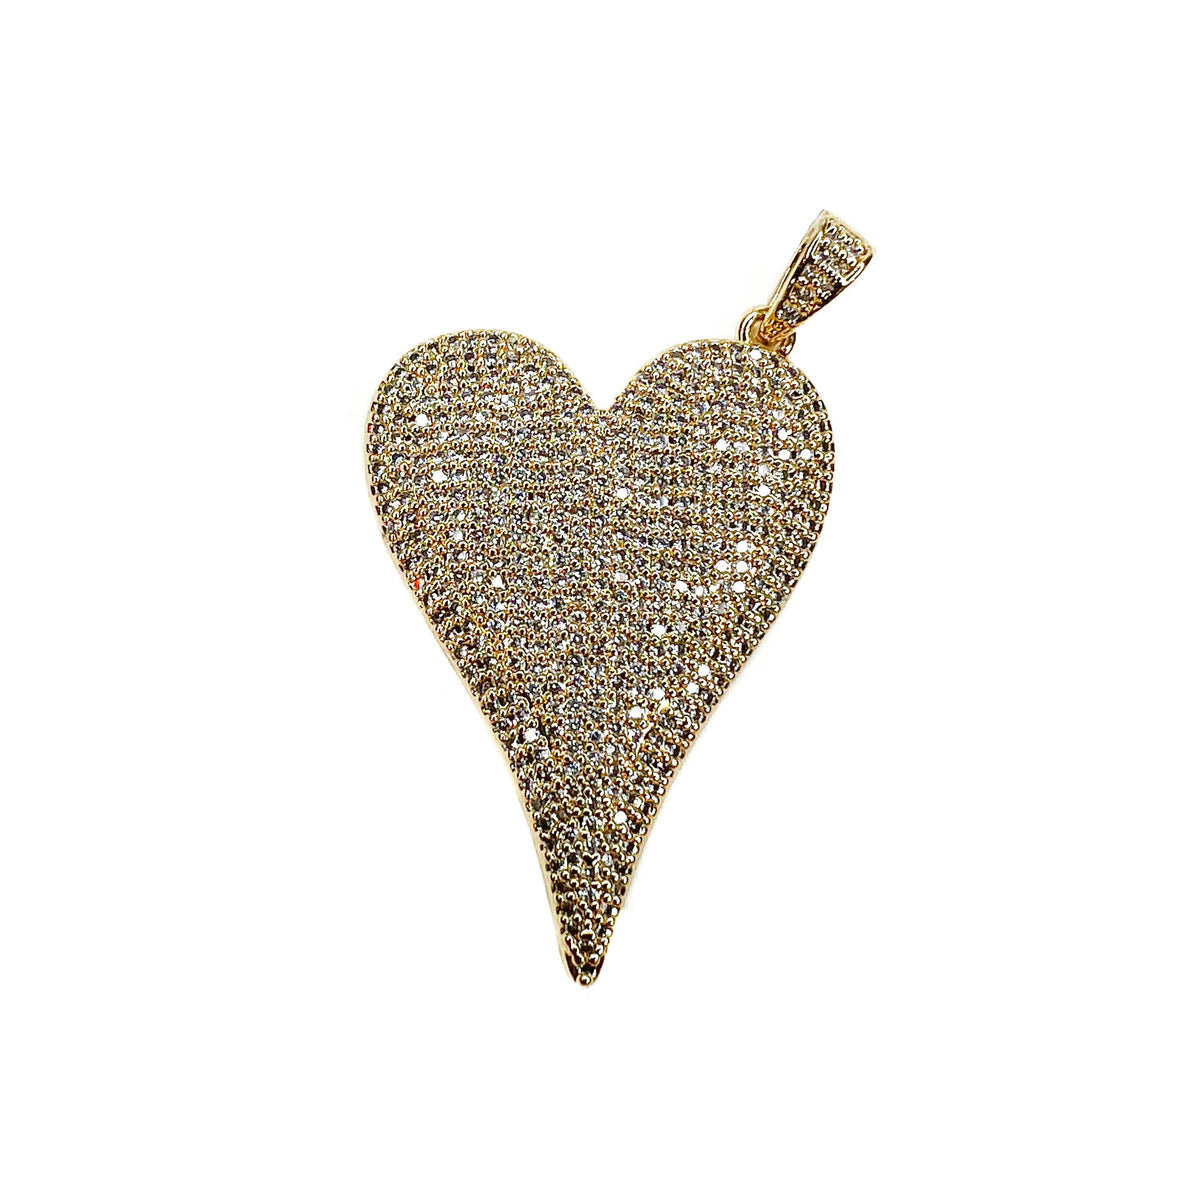 Heart CZ Necklace Charms for Charm Bar: Silver CZ